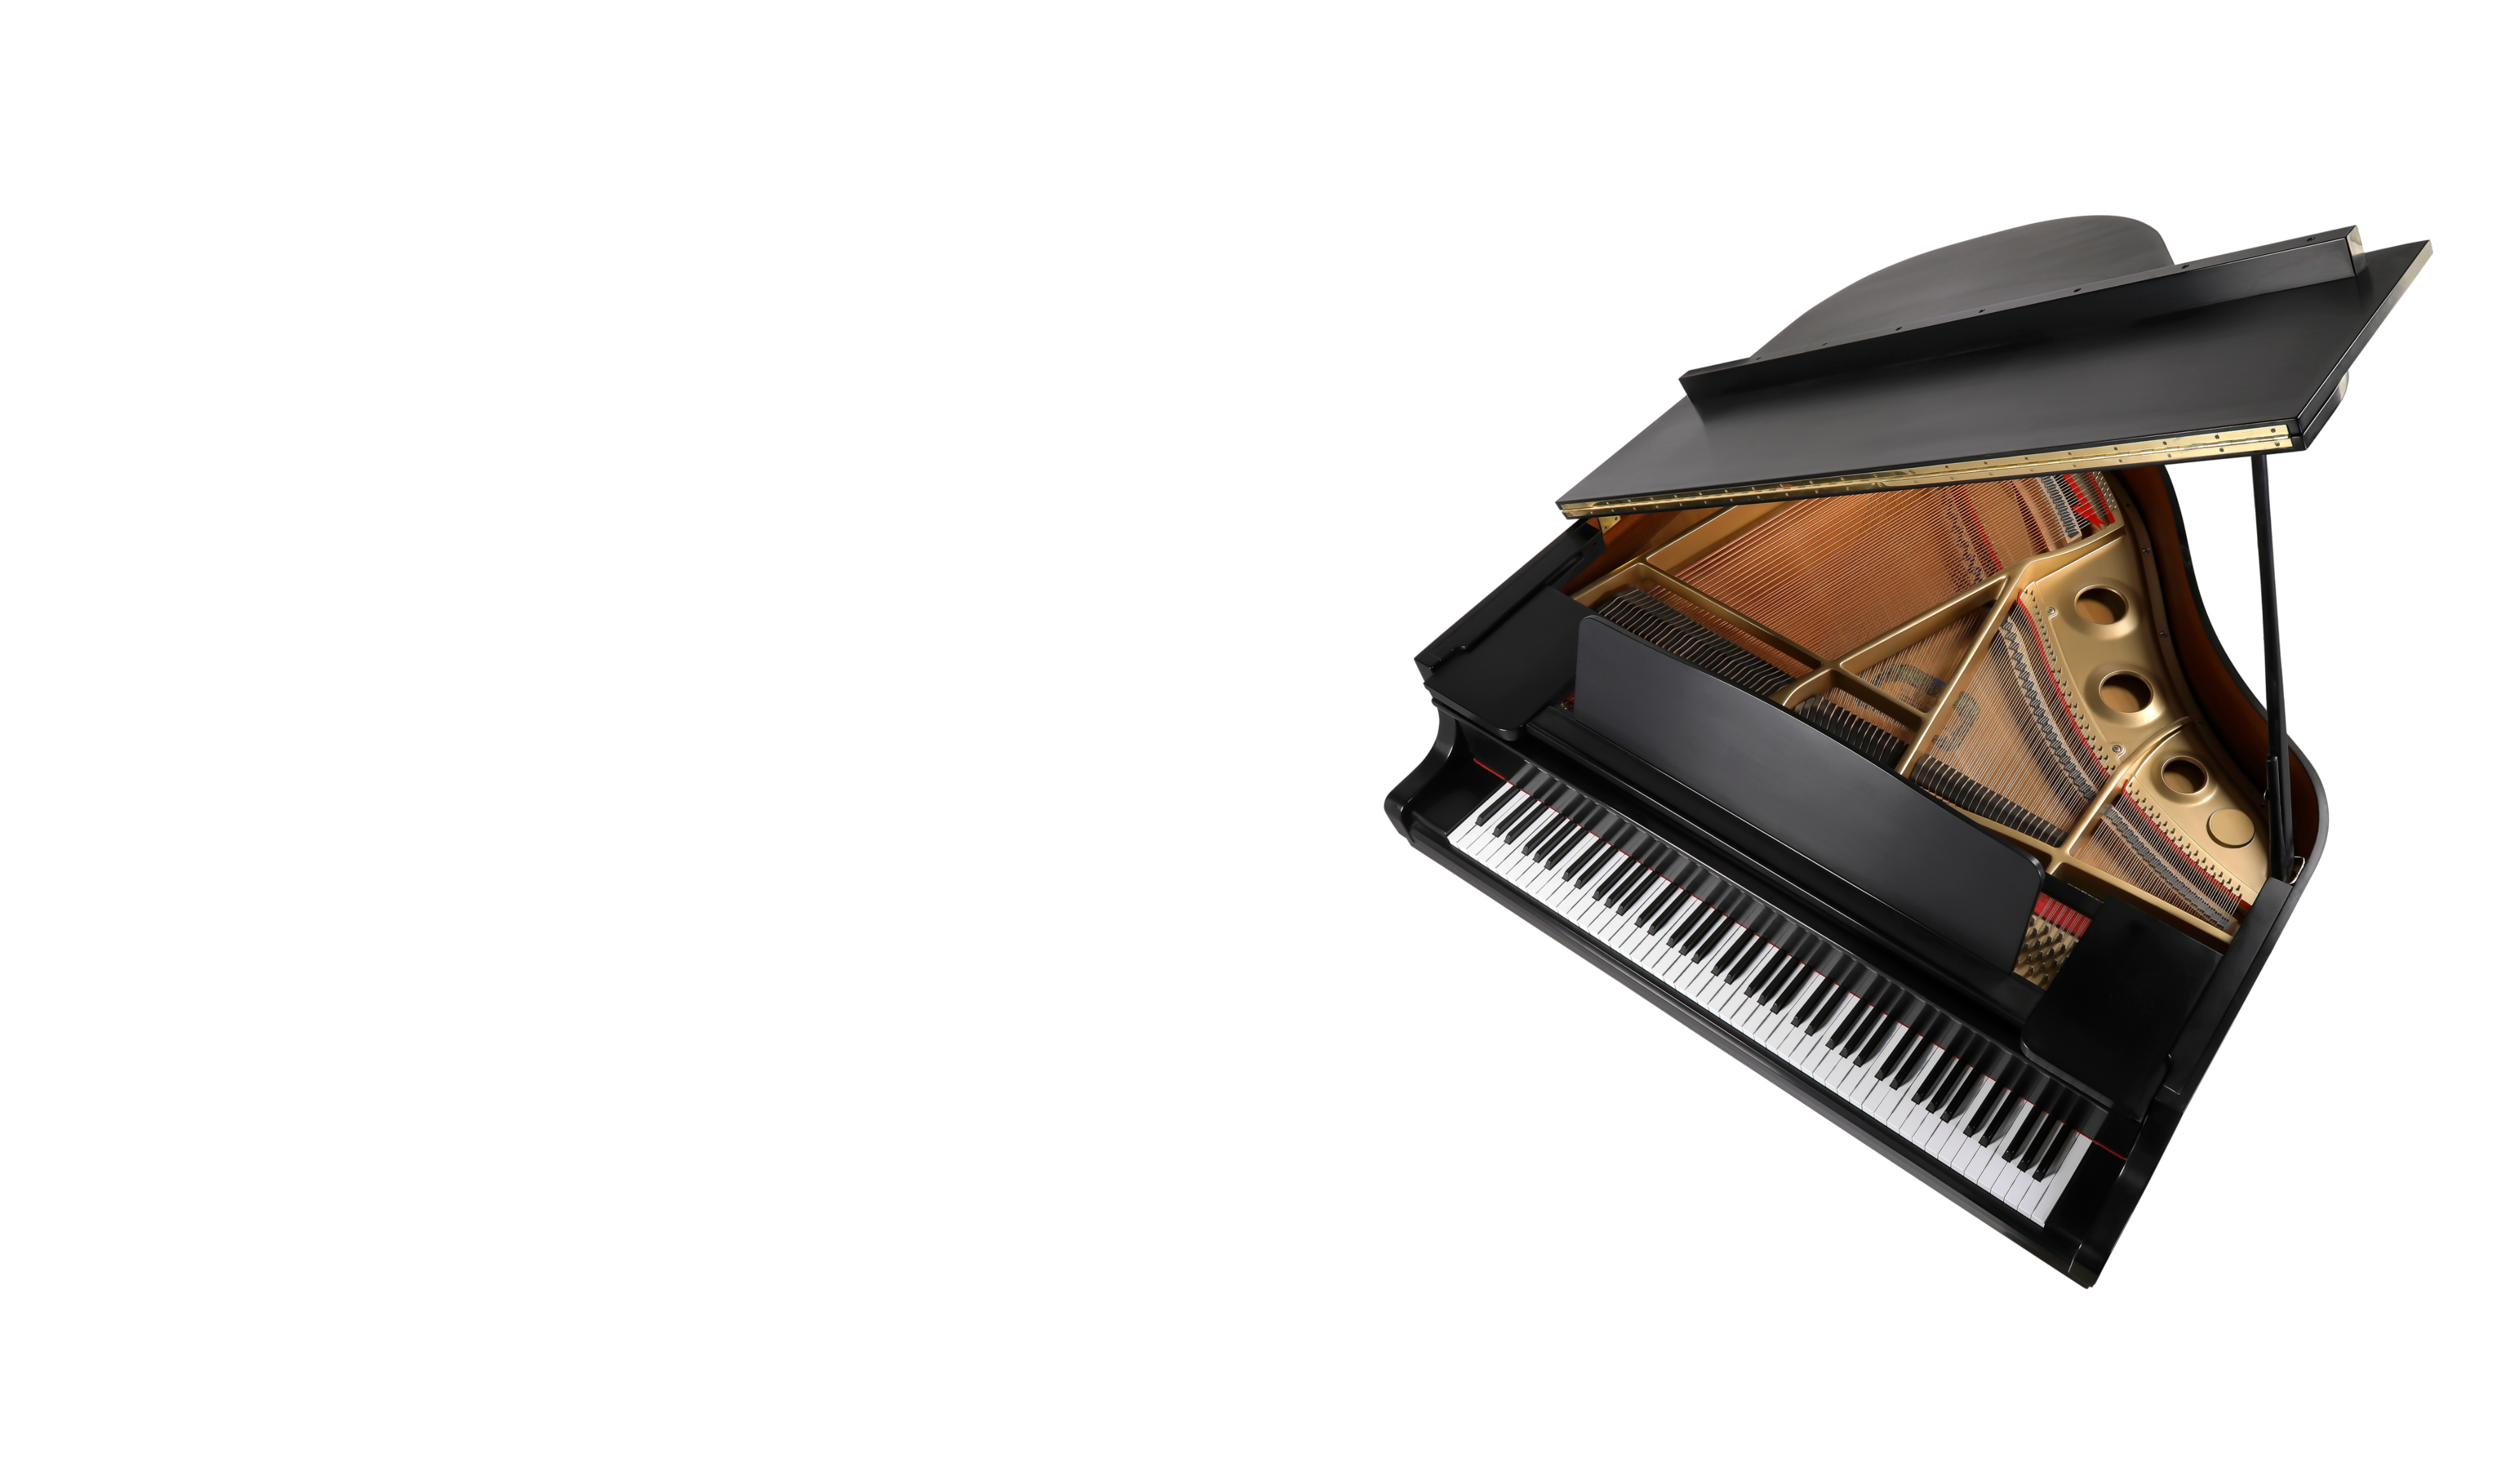 SEE THE PREPARED PIANO IN ACTION